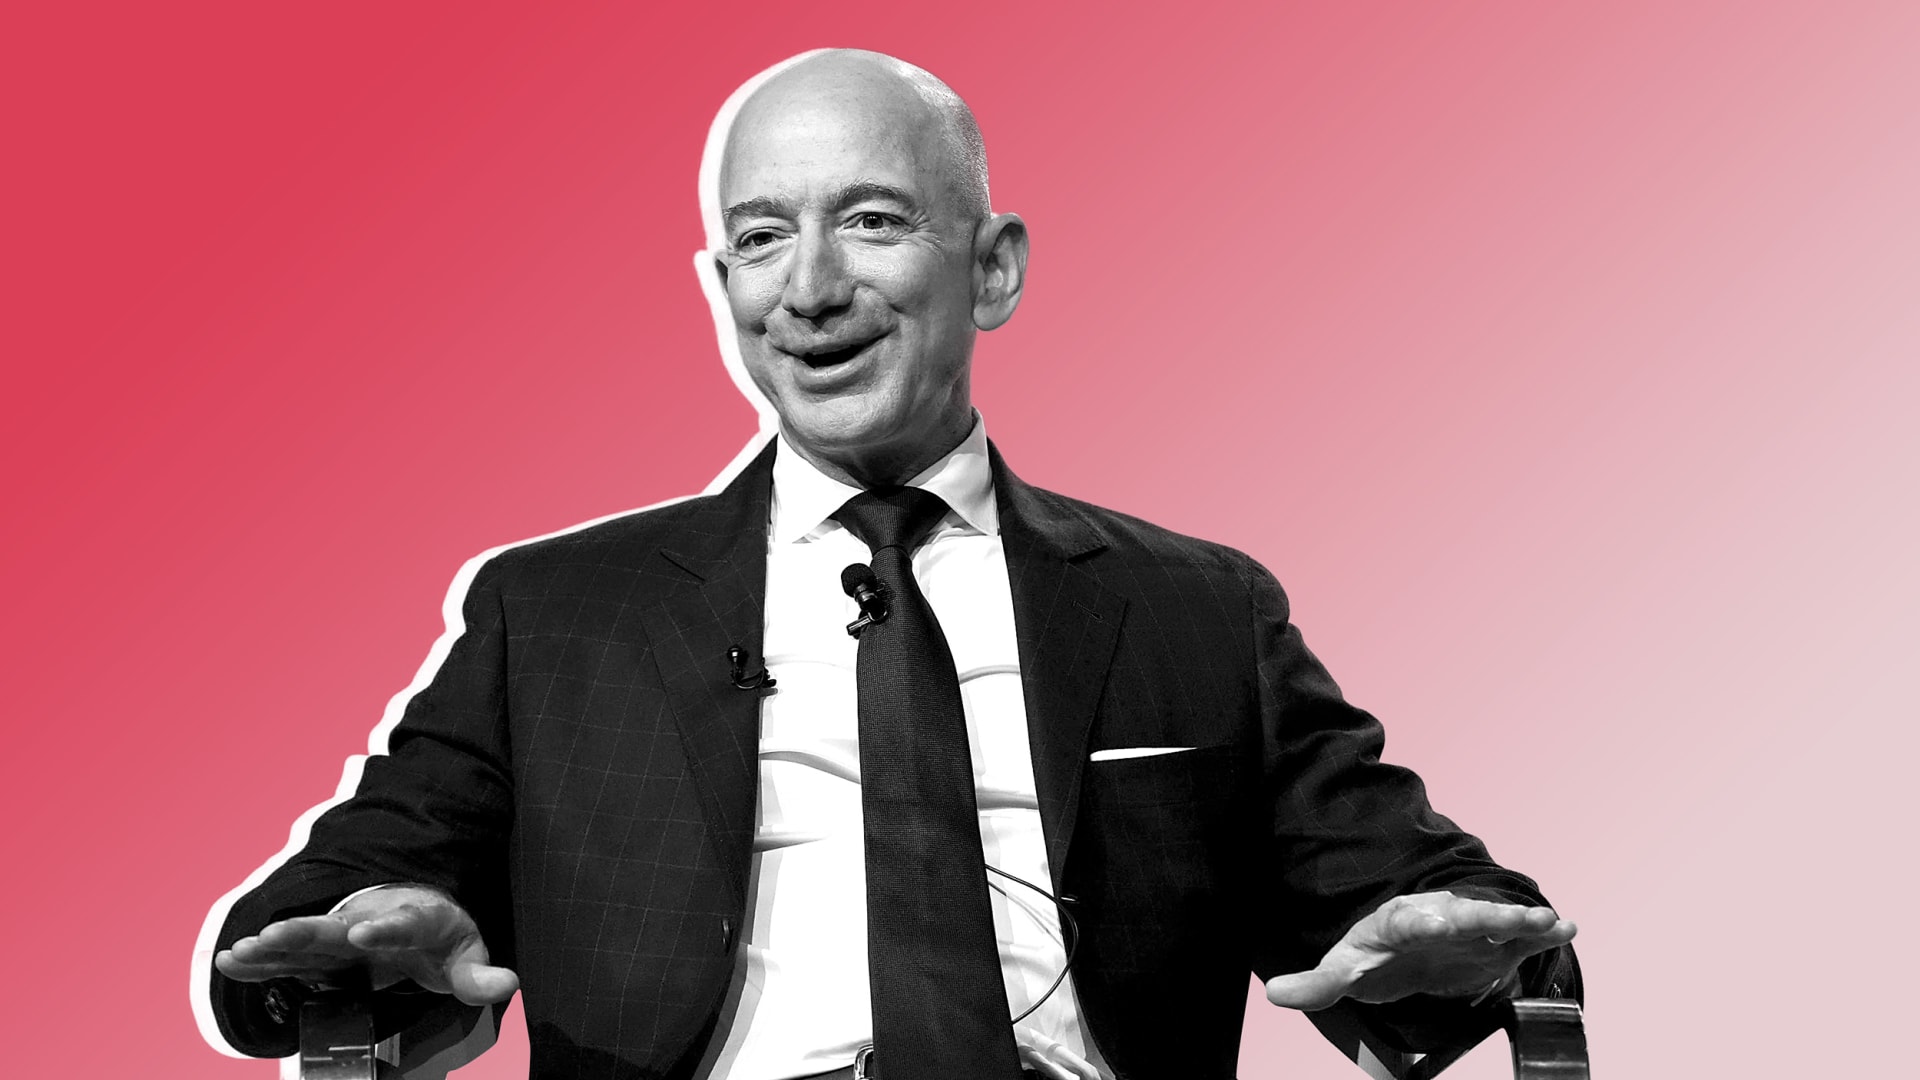 Jeff Bezos Says There Are 2 Kinds of Failure and You Should Only Tolerate 1